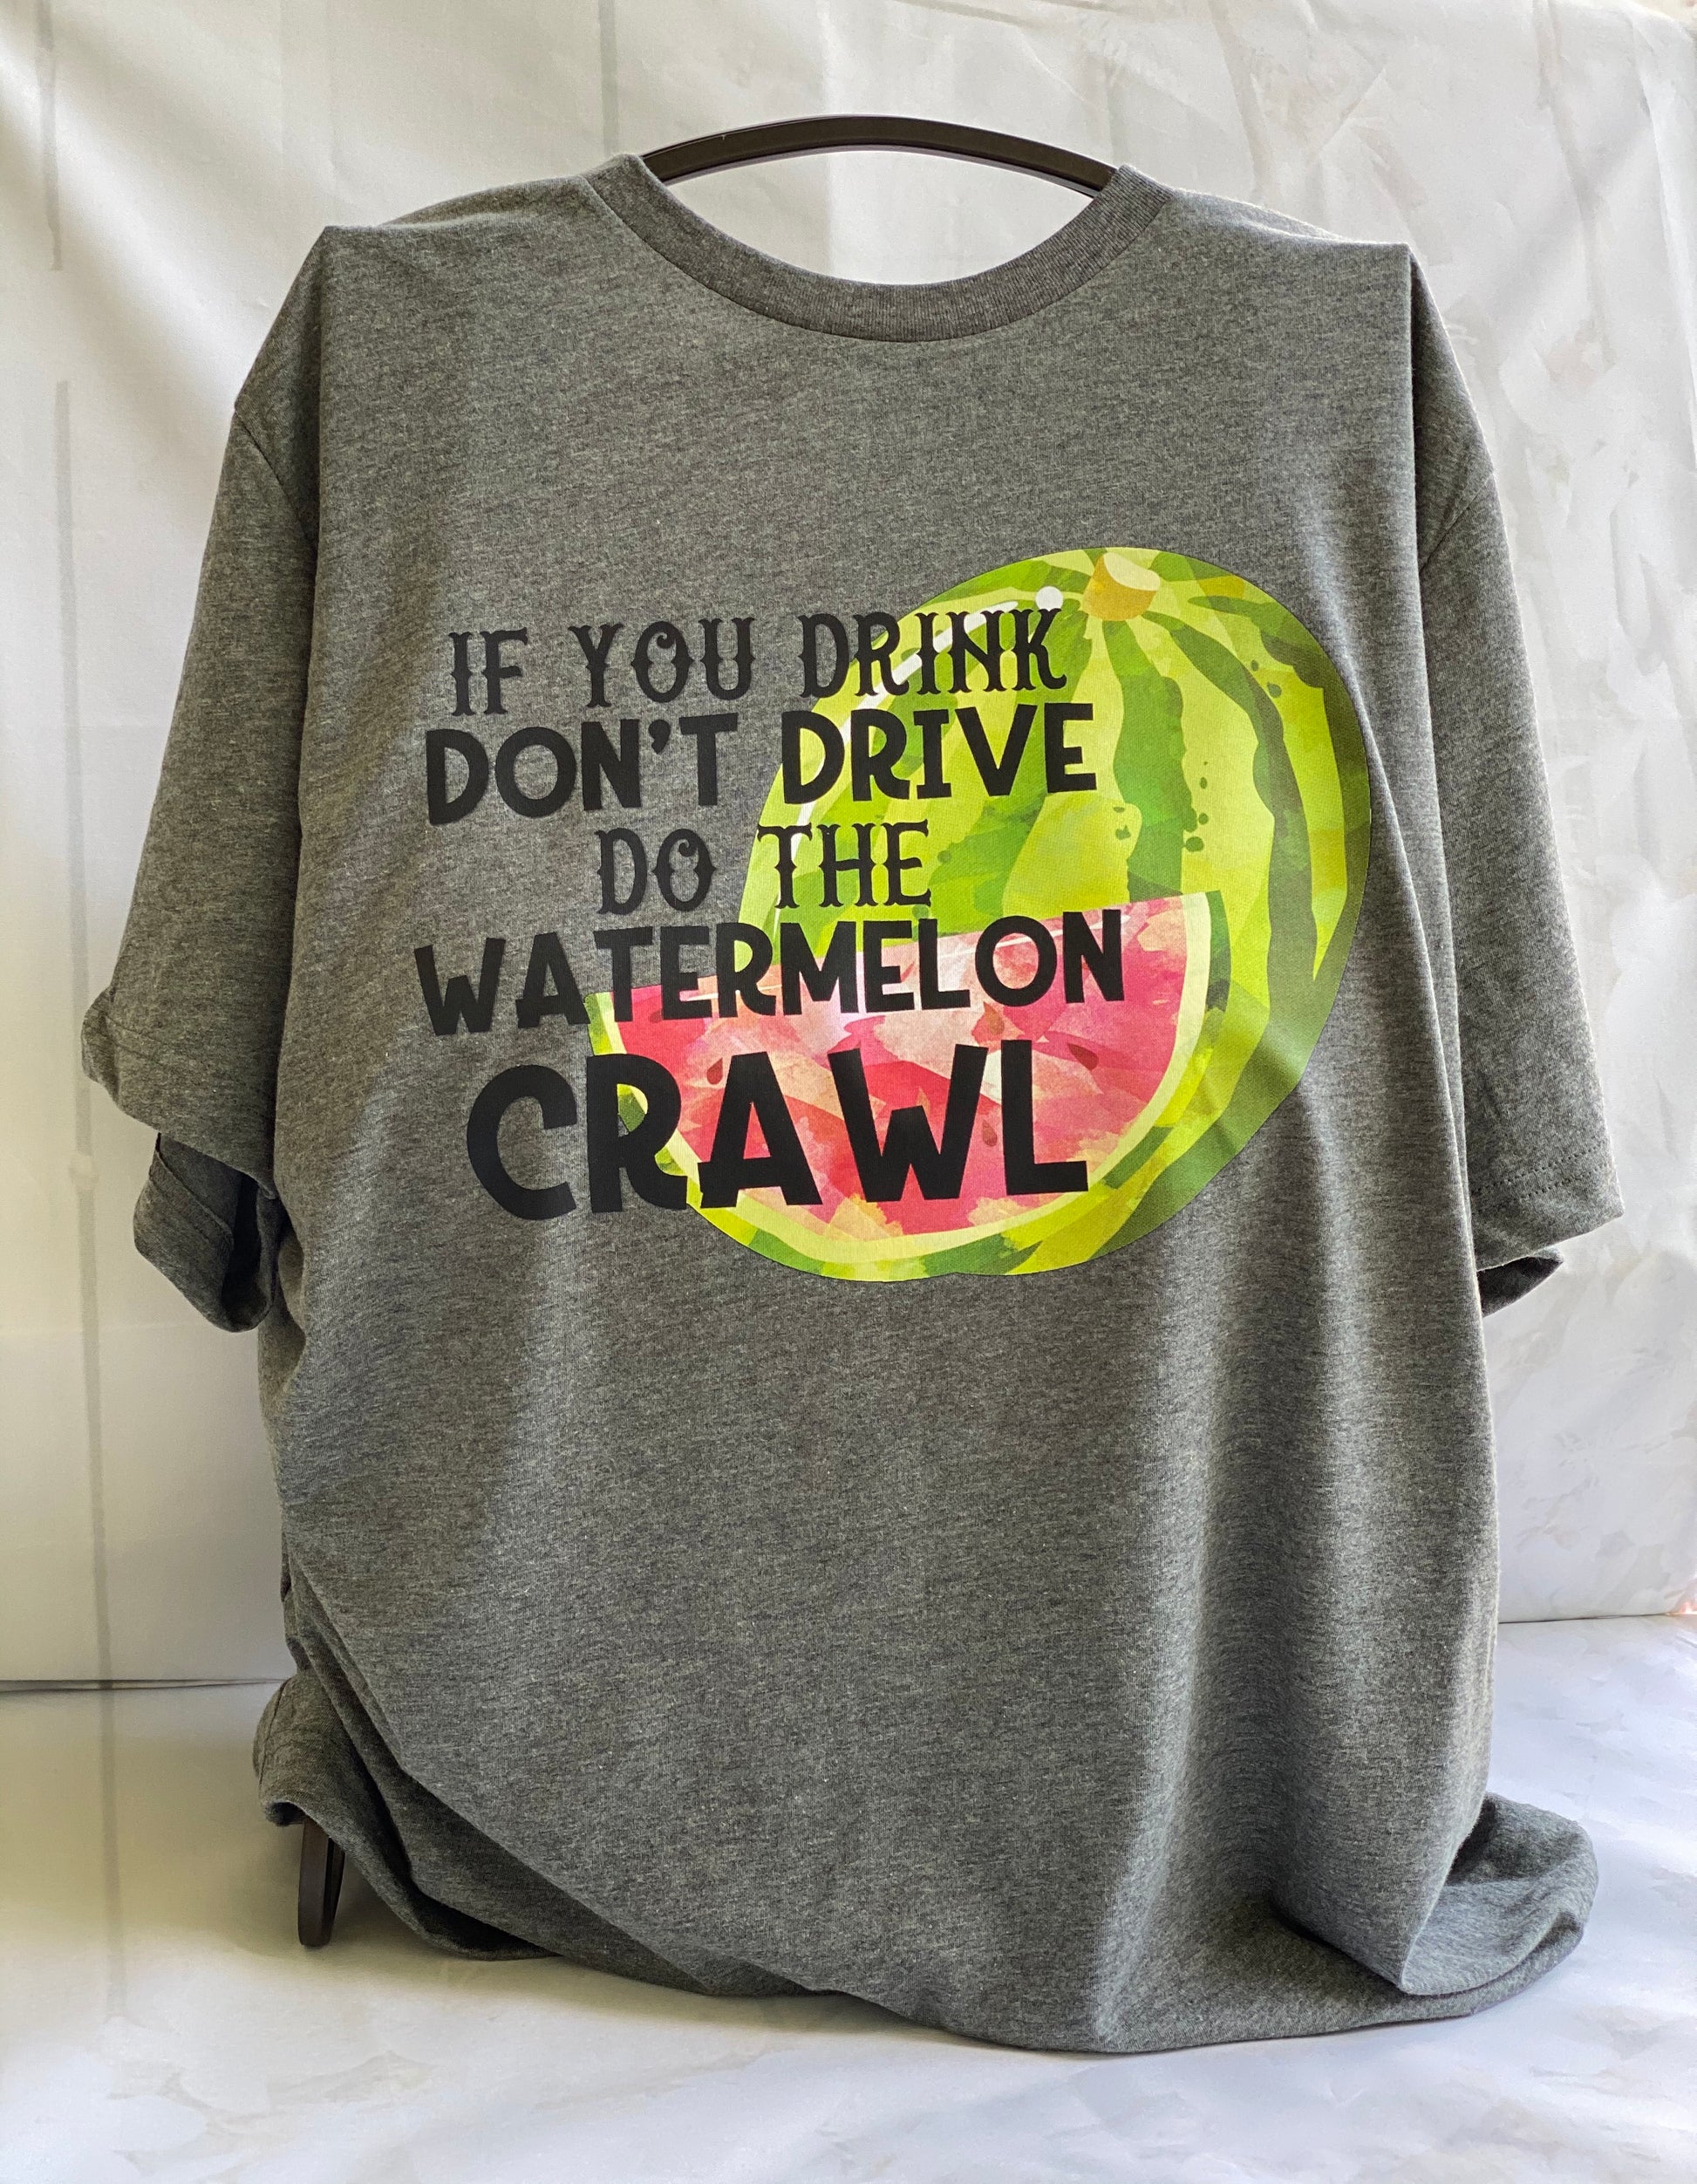 If You Drink Don't Drive Do the Watermelon Crawl *HIGH HEAT* (350°-375°) - Chase Design Co.